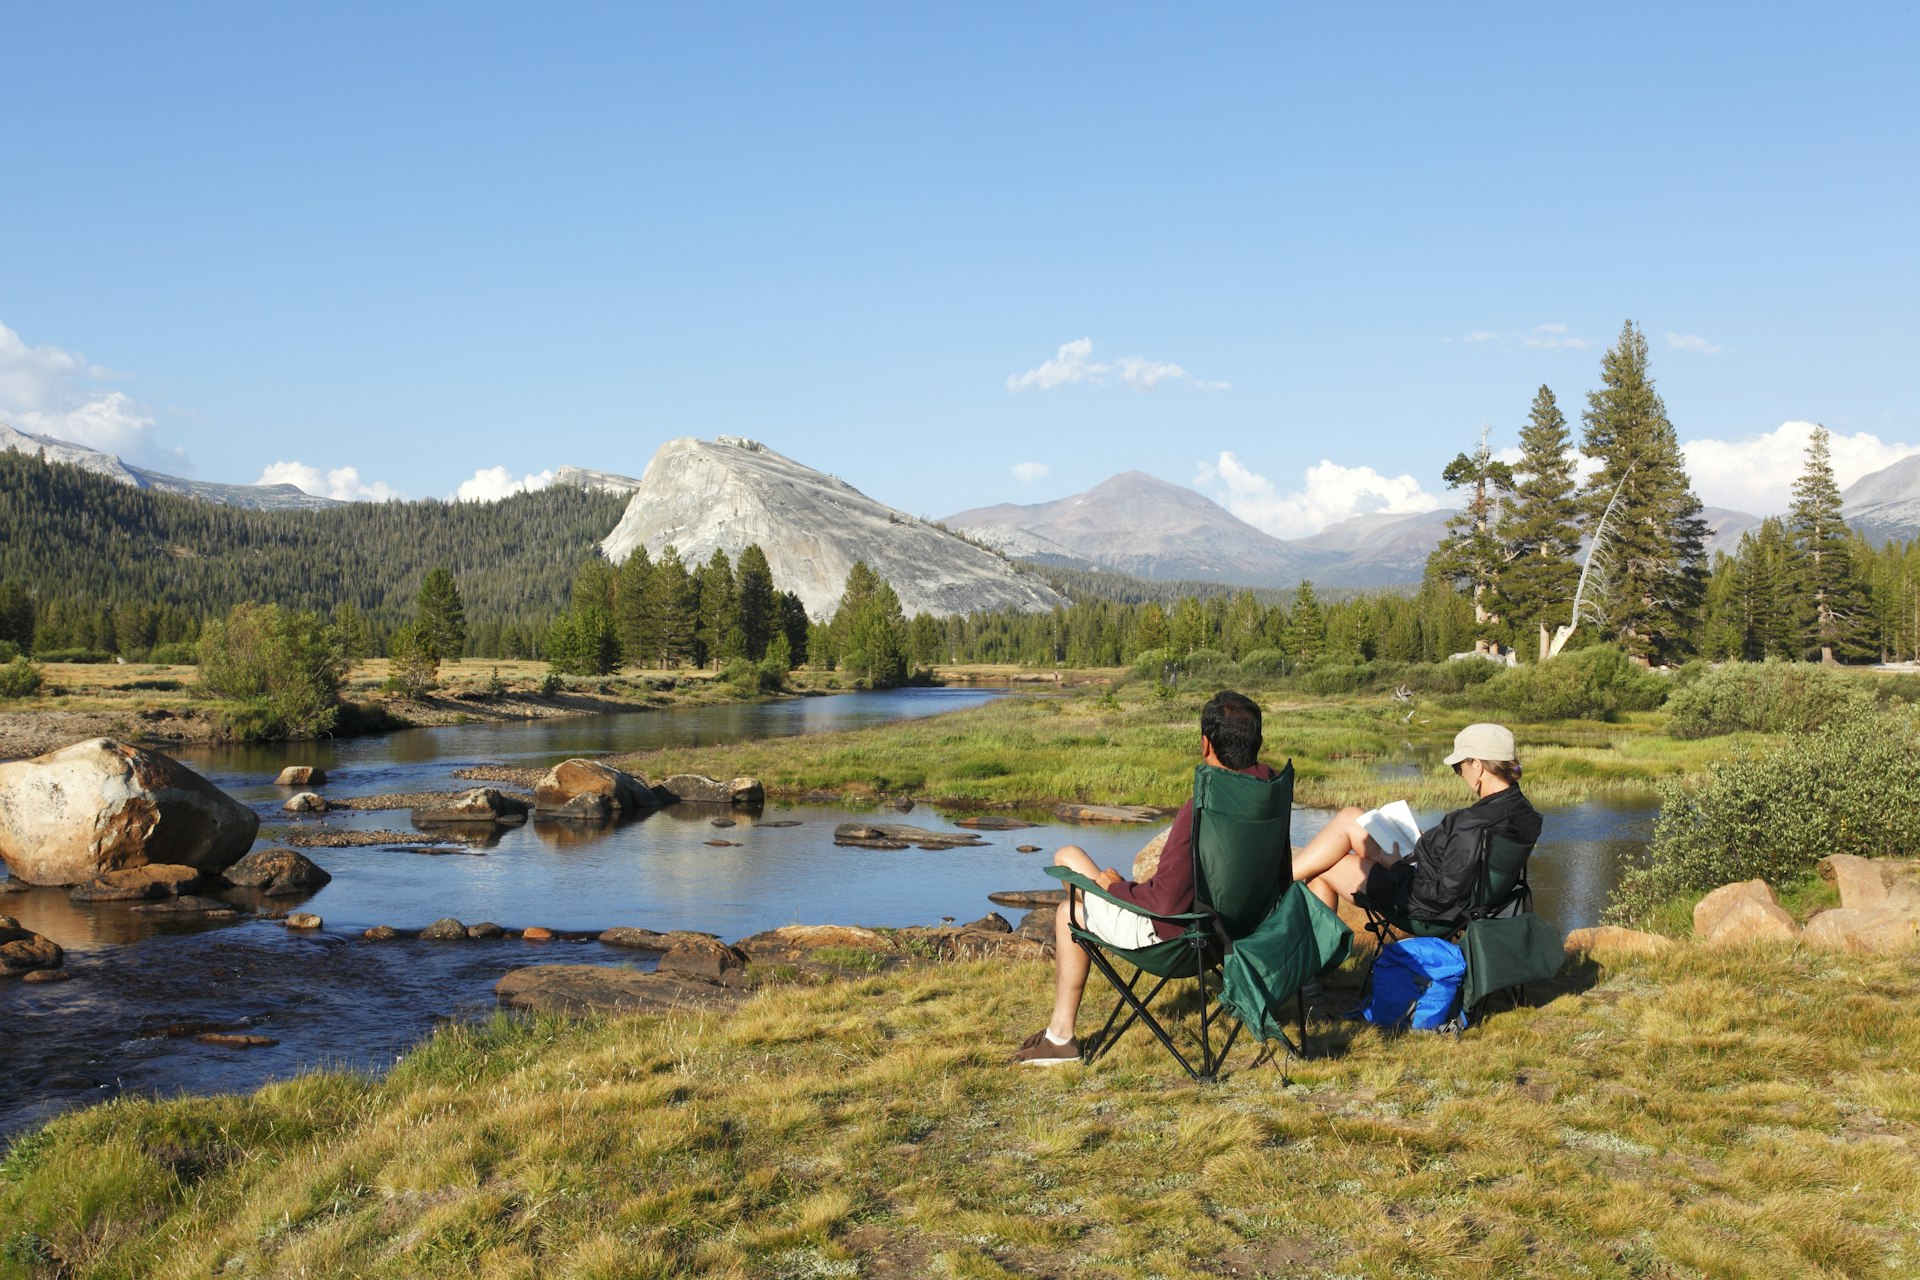 Camping at Tuolumne Meadow